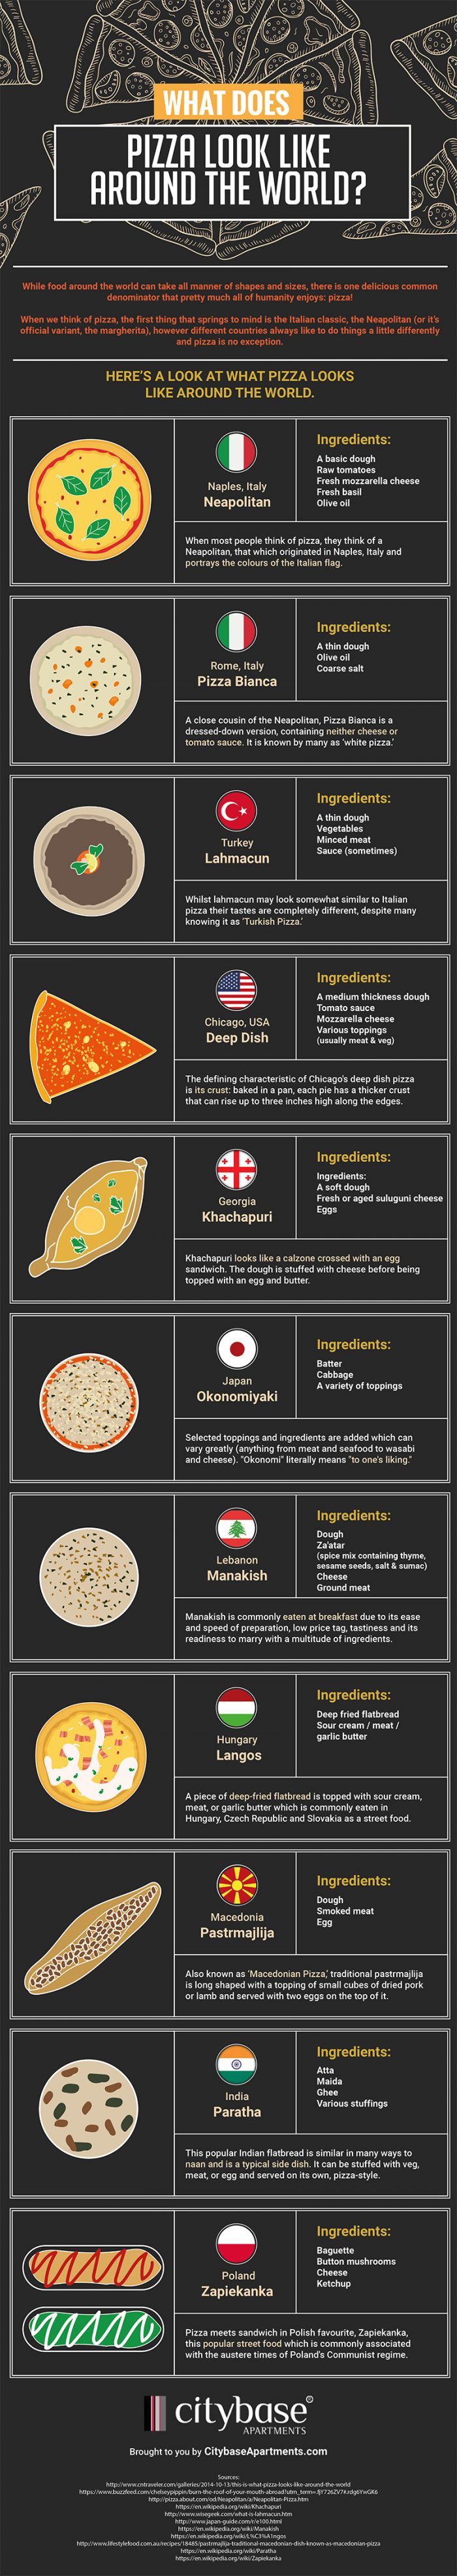 what does pizza look like around the world